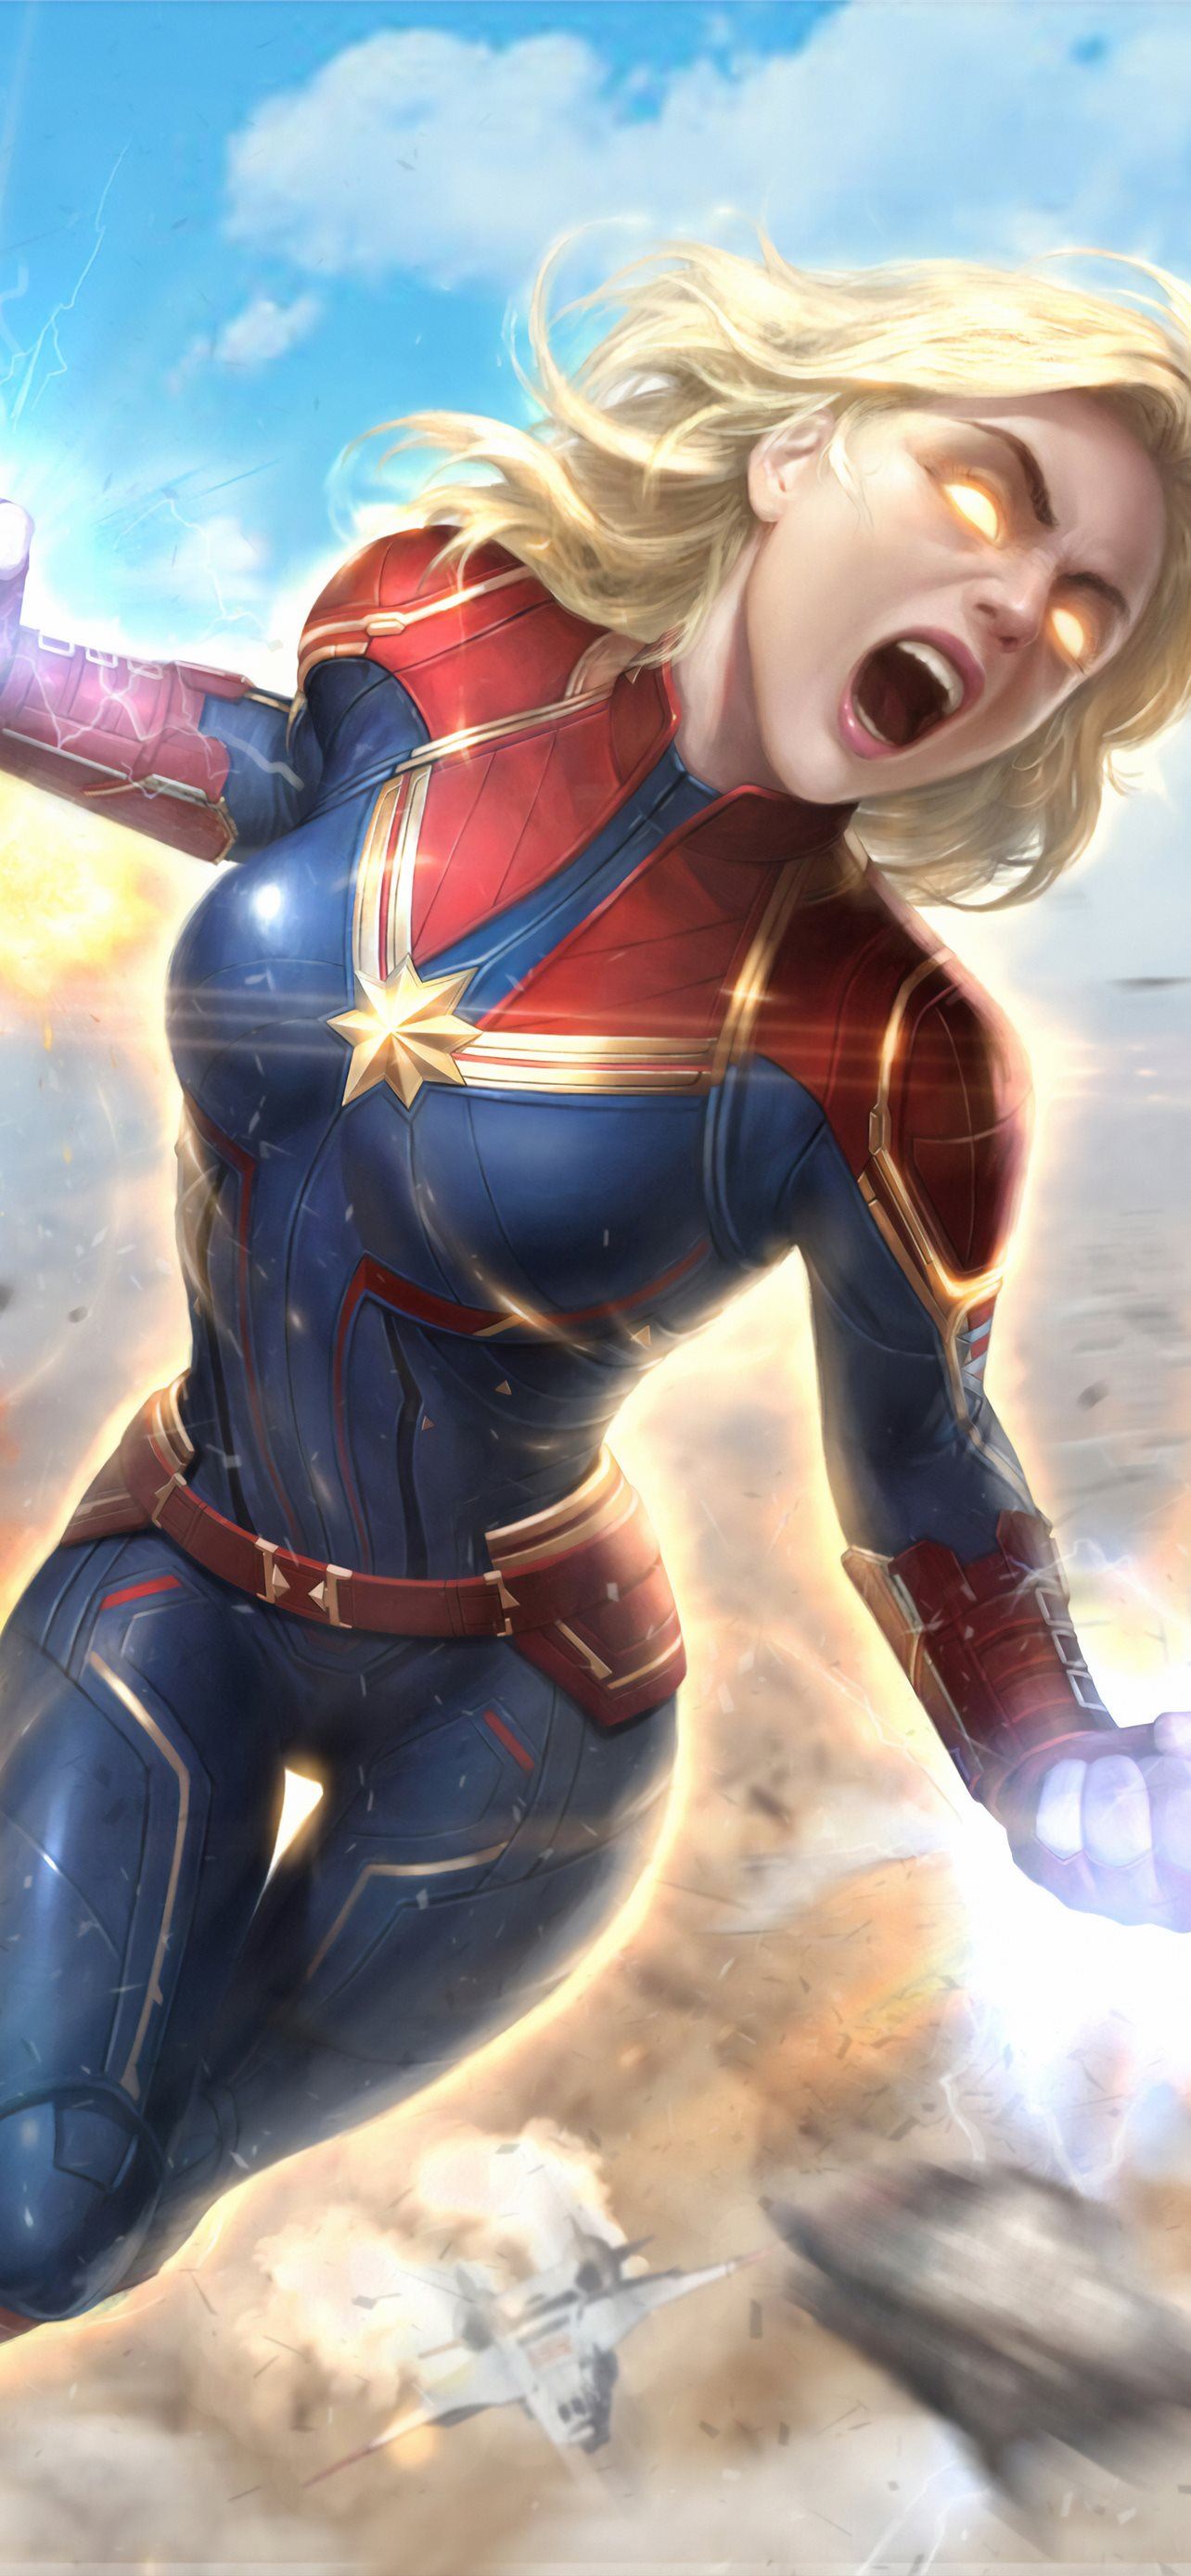 Captain Marvel Newarts Sony Xperia X XZ Z5 Premium... iPhone Wallpapers  Free Download